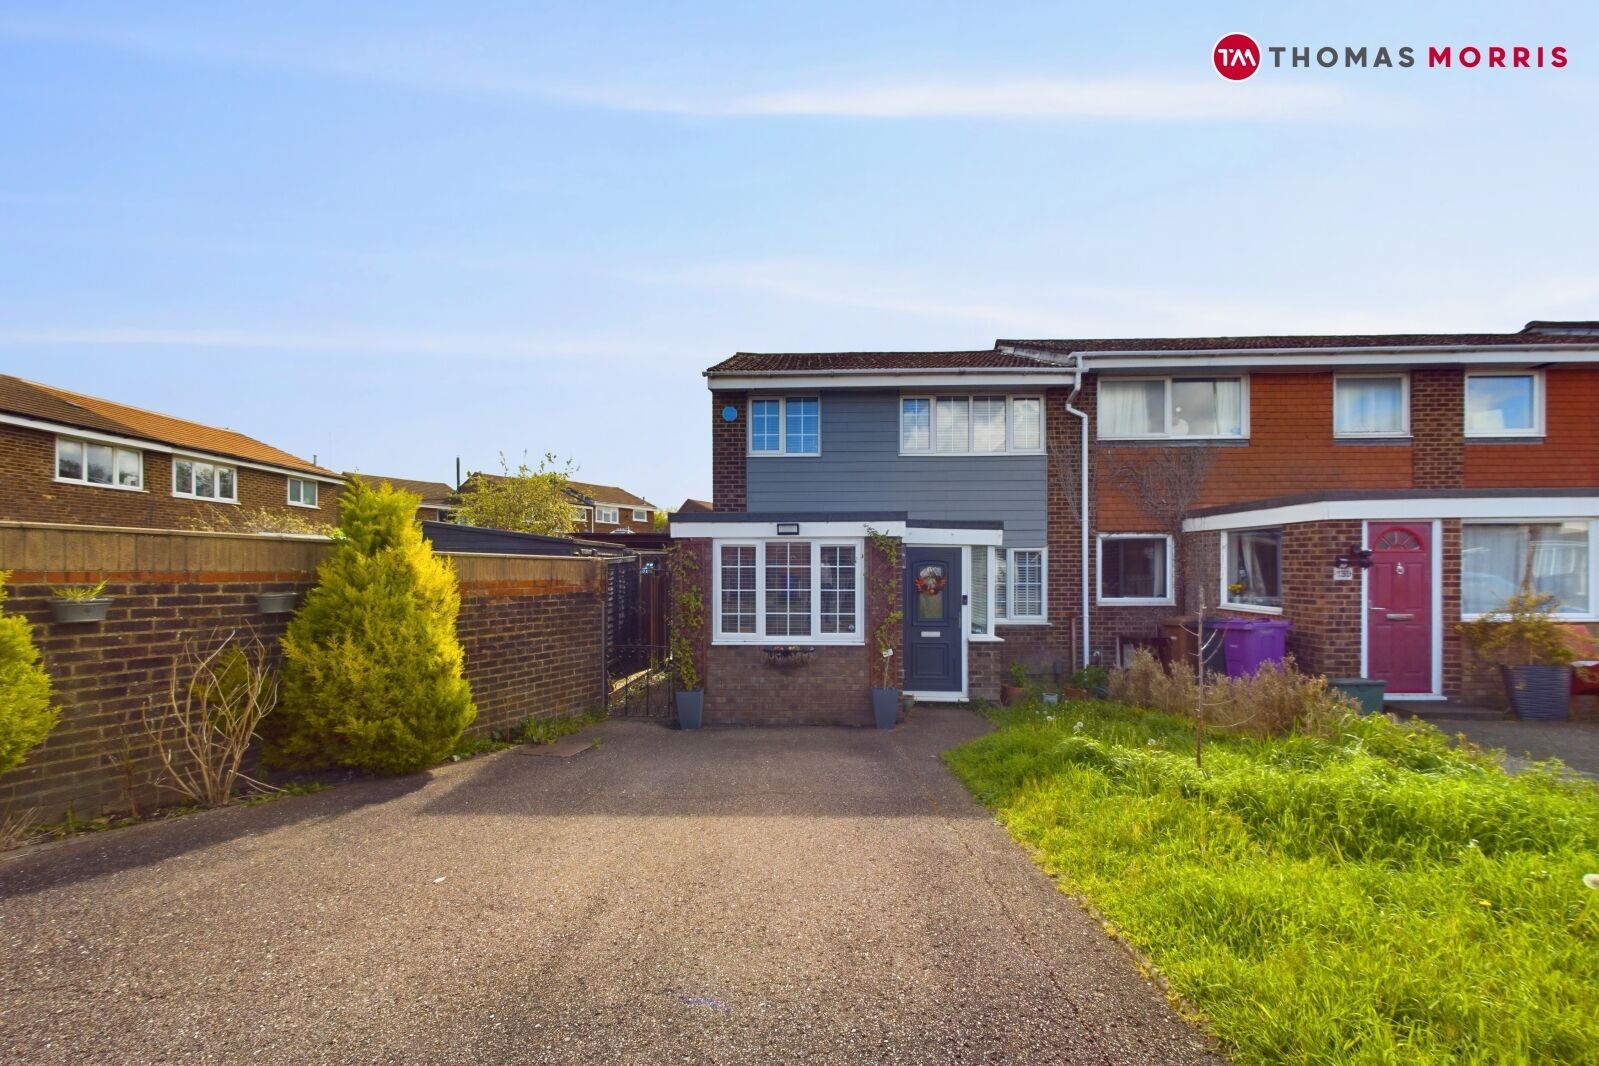 3 bedroom end terraced house for sale Burns Road, Royston, SG8, main image